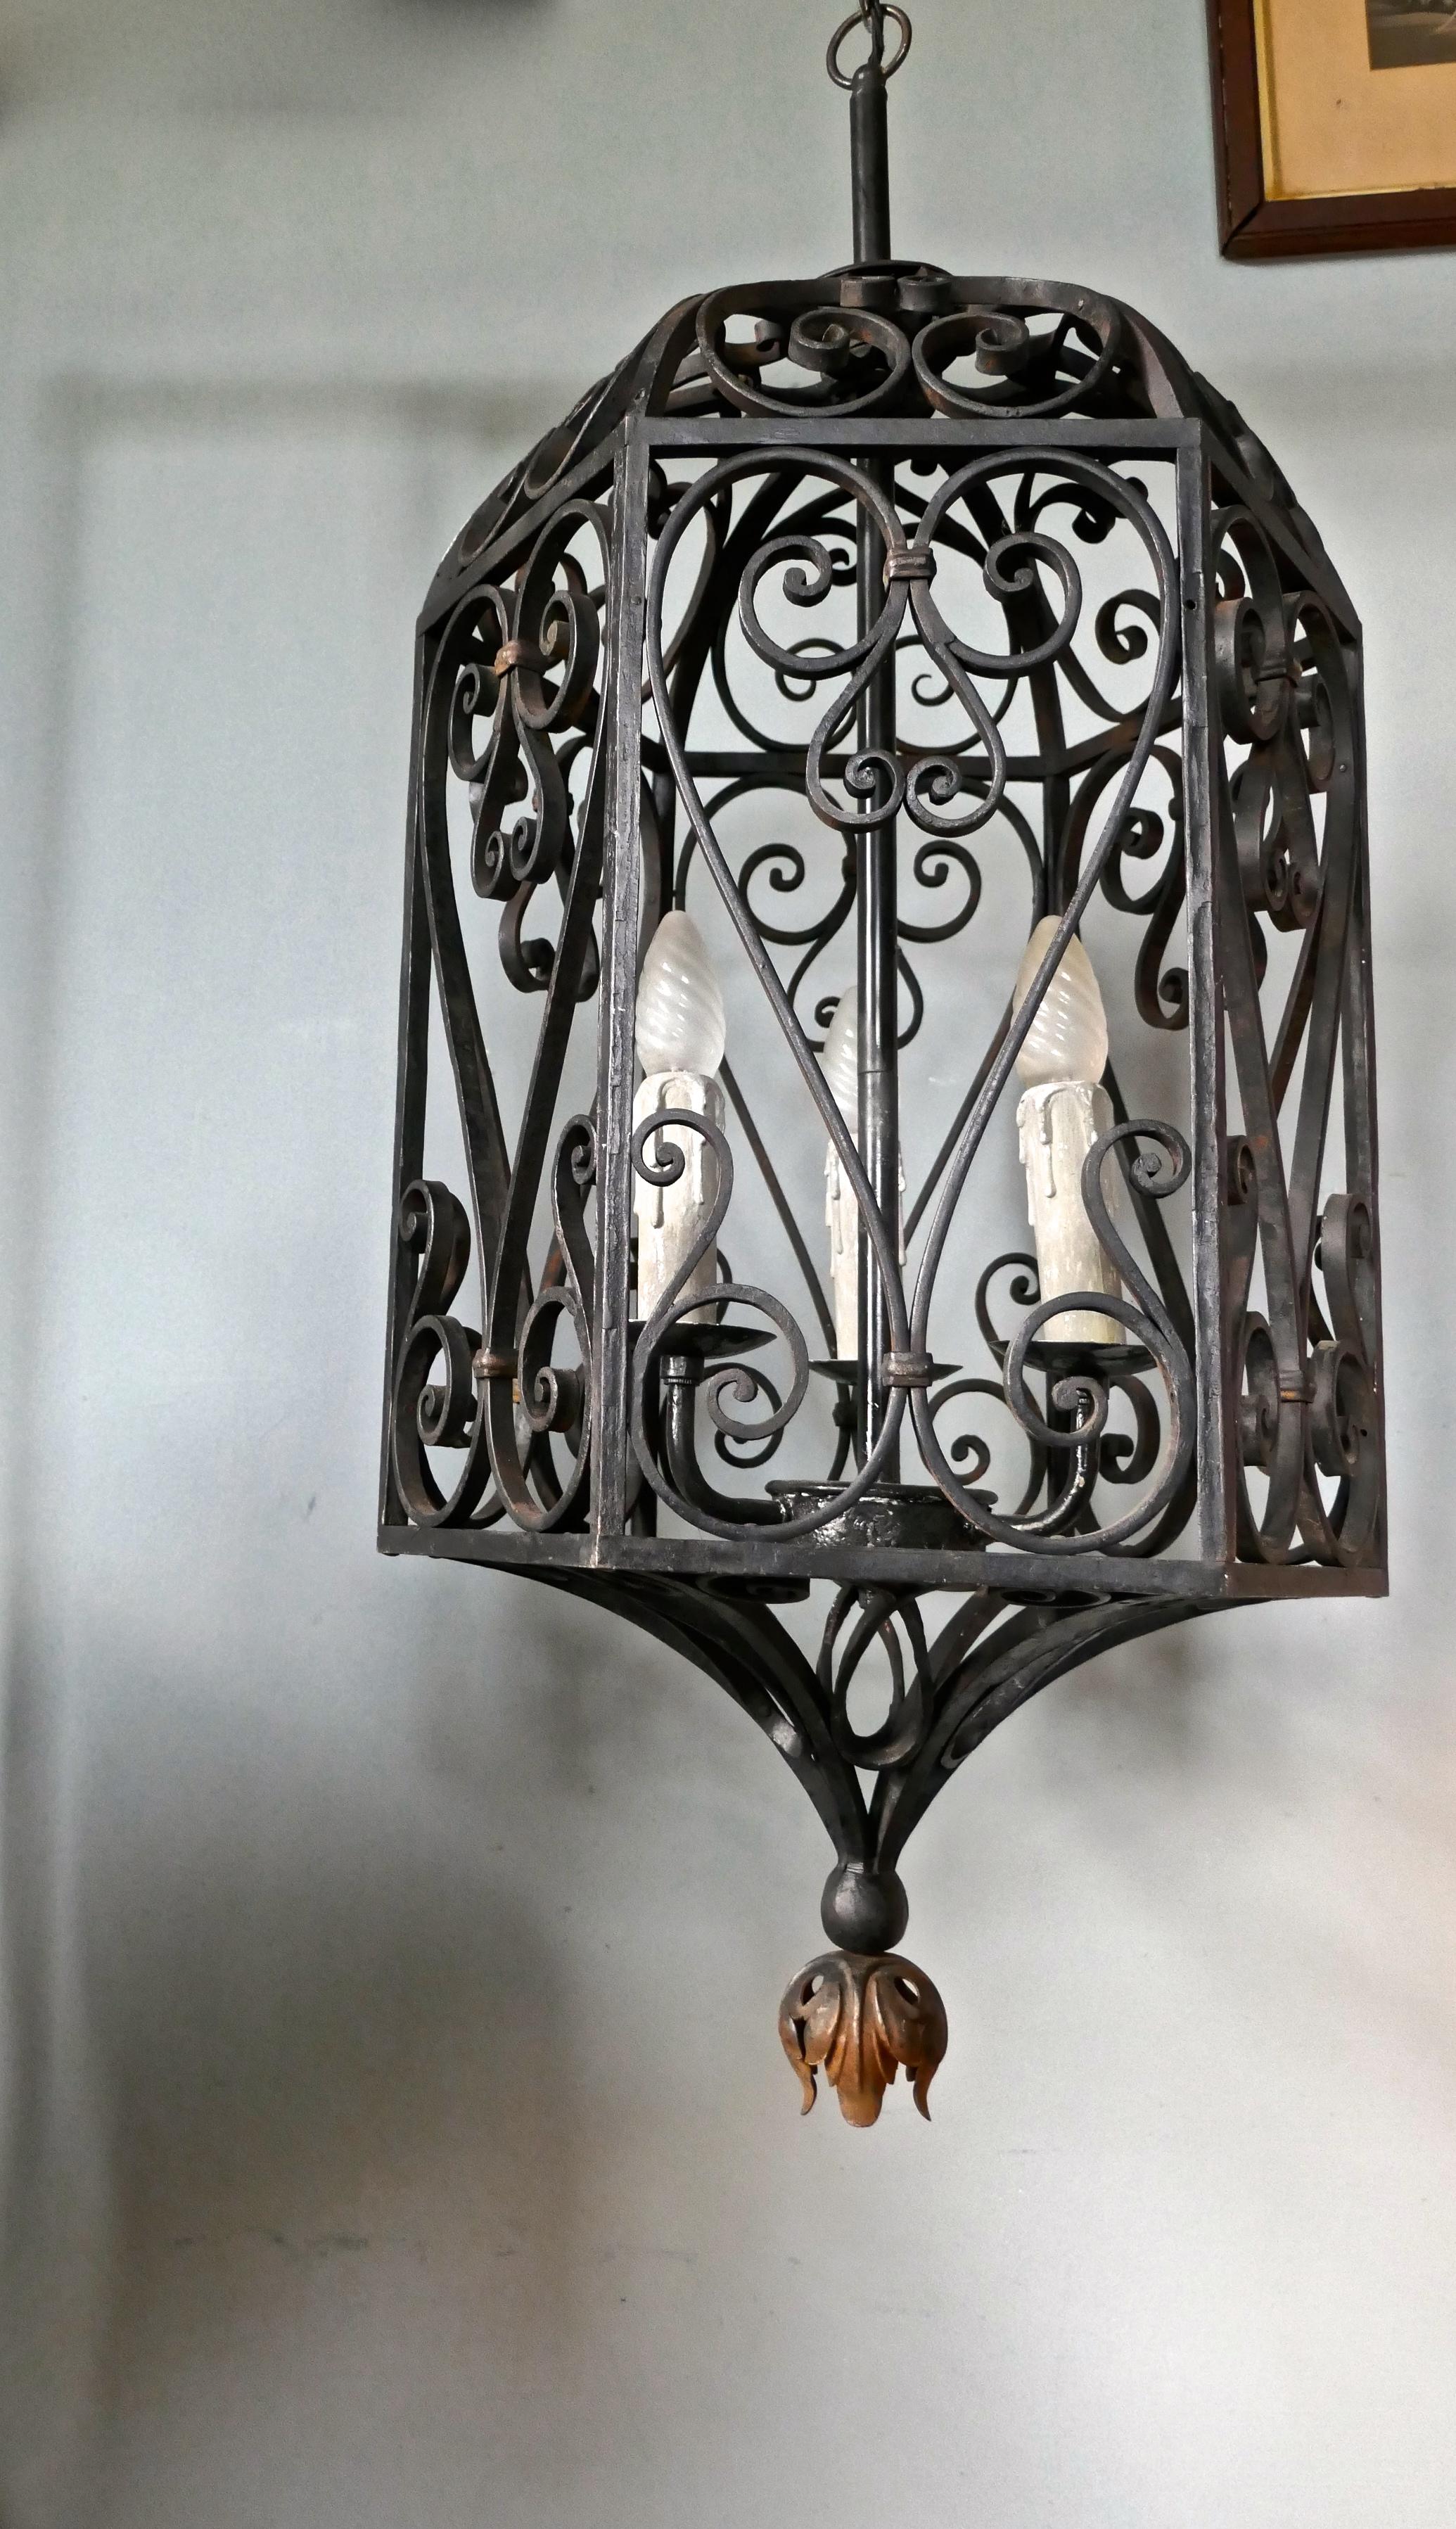 Very large decorative wrought iron porch lantern

This is a very large hallway or porch lantern has six sides, an arched top and a leaf decoration at the bottom
The decorative iron work is over 1 cm thick making the lantern very sturdy and a